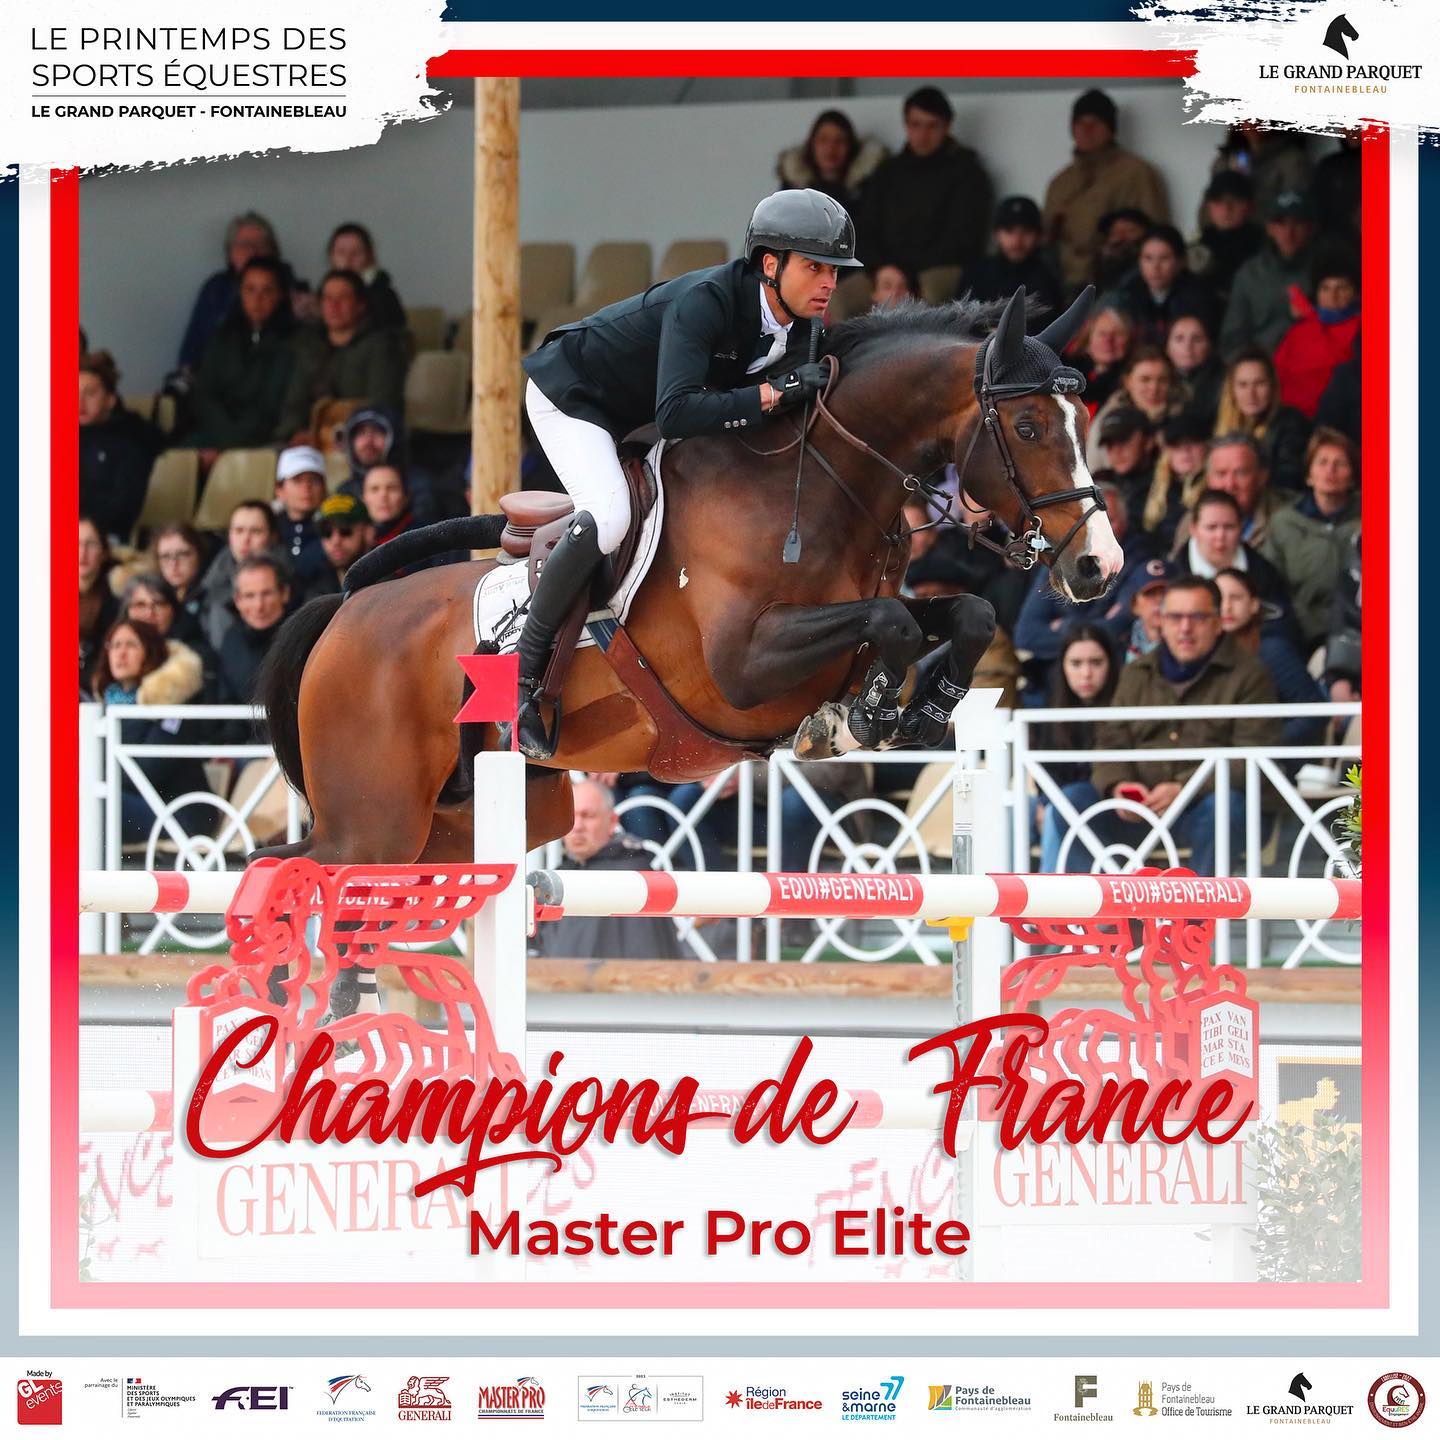 Edward Levy by far the best in French Championship